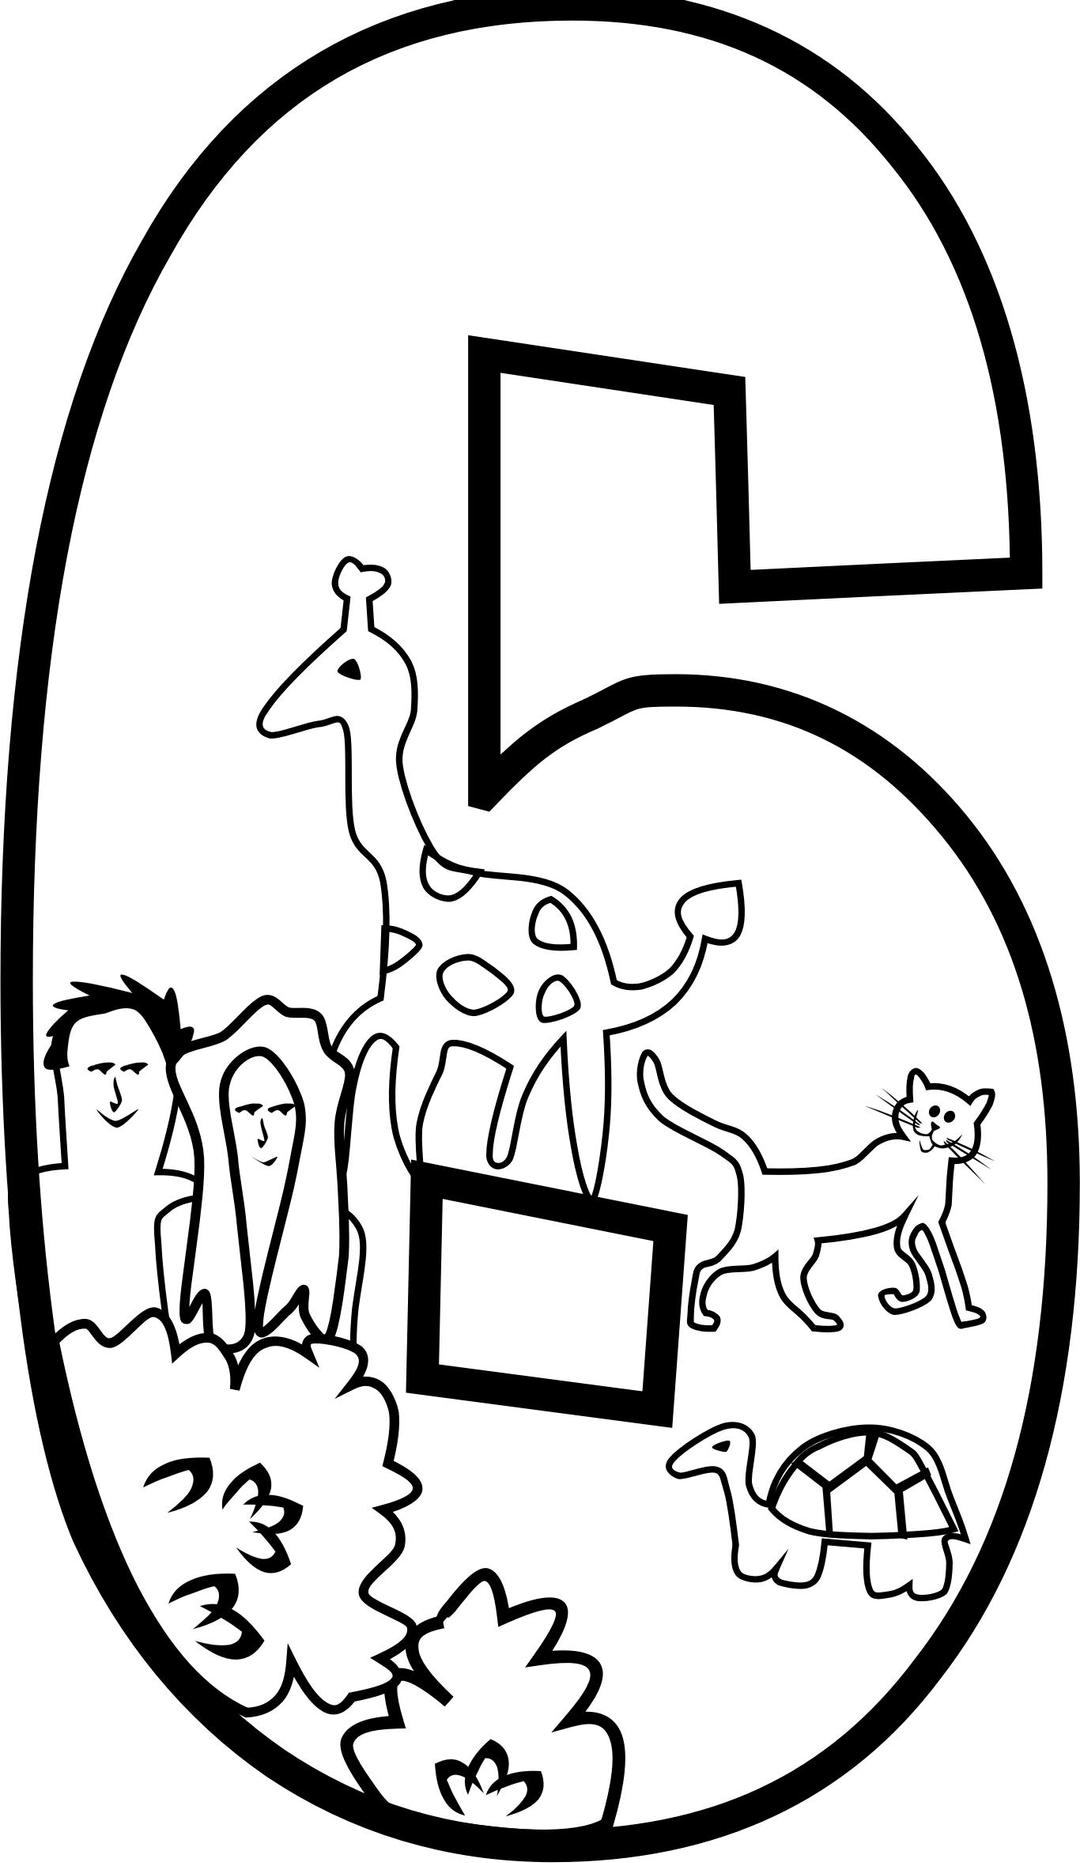 Creation Day 6 Coloring Page png transparent